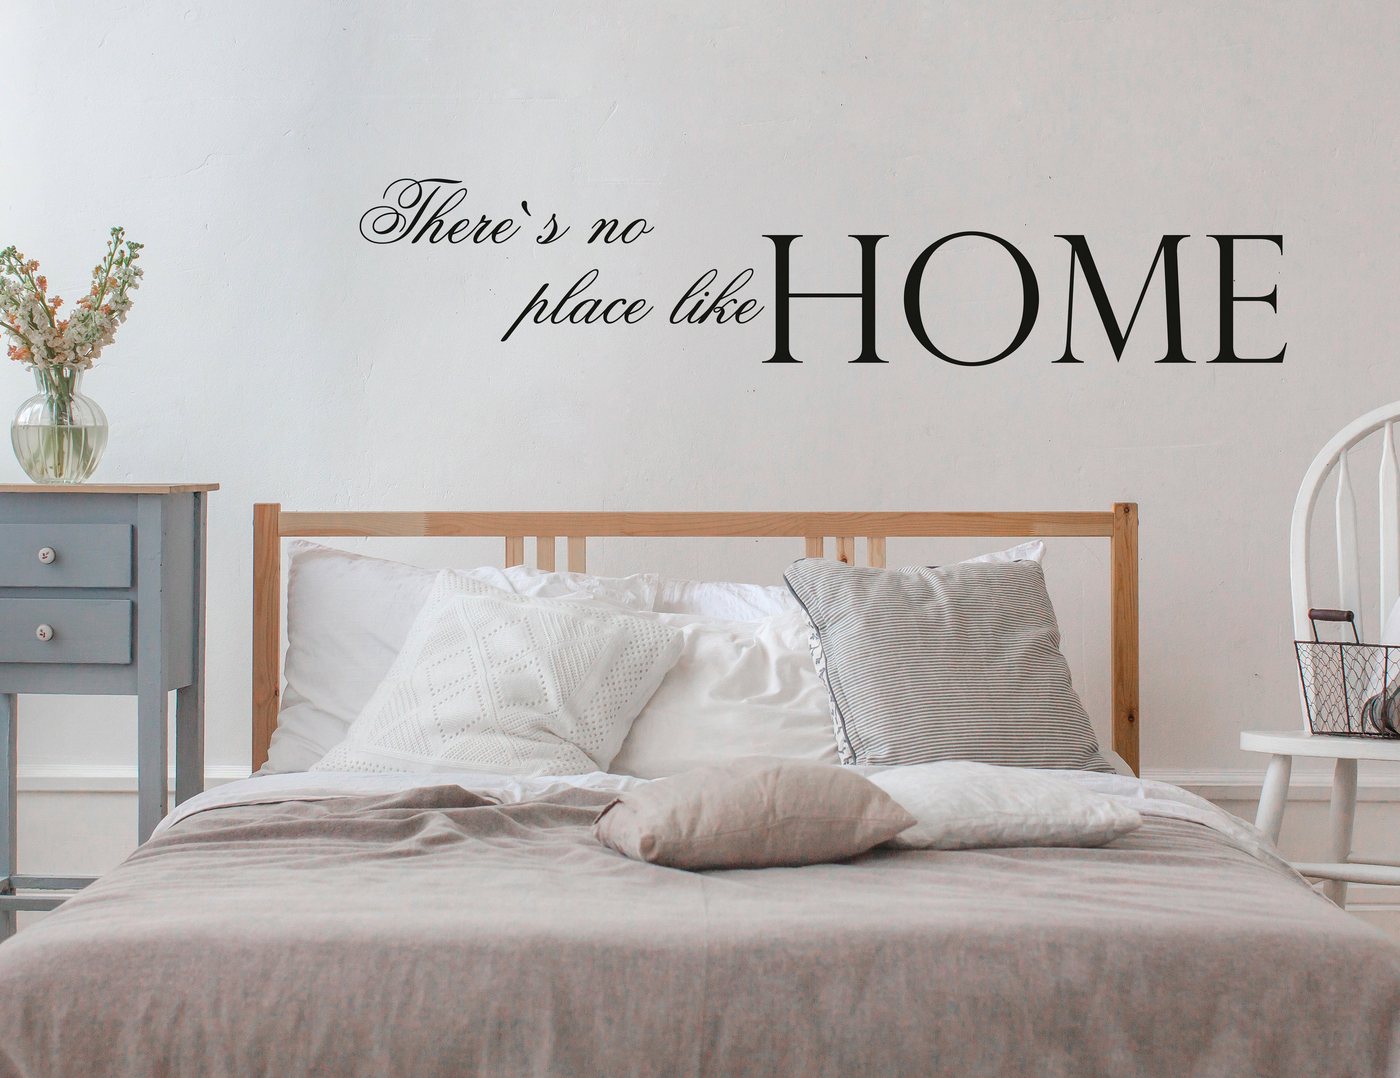 queence Wandtattoo »There's no place like Home«, hohe Klebkraft-kaufen